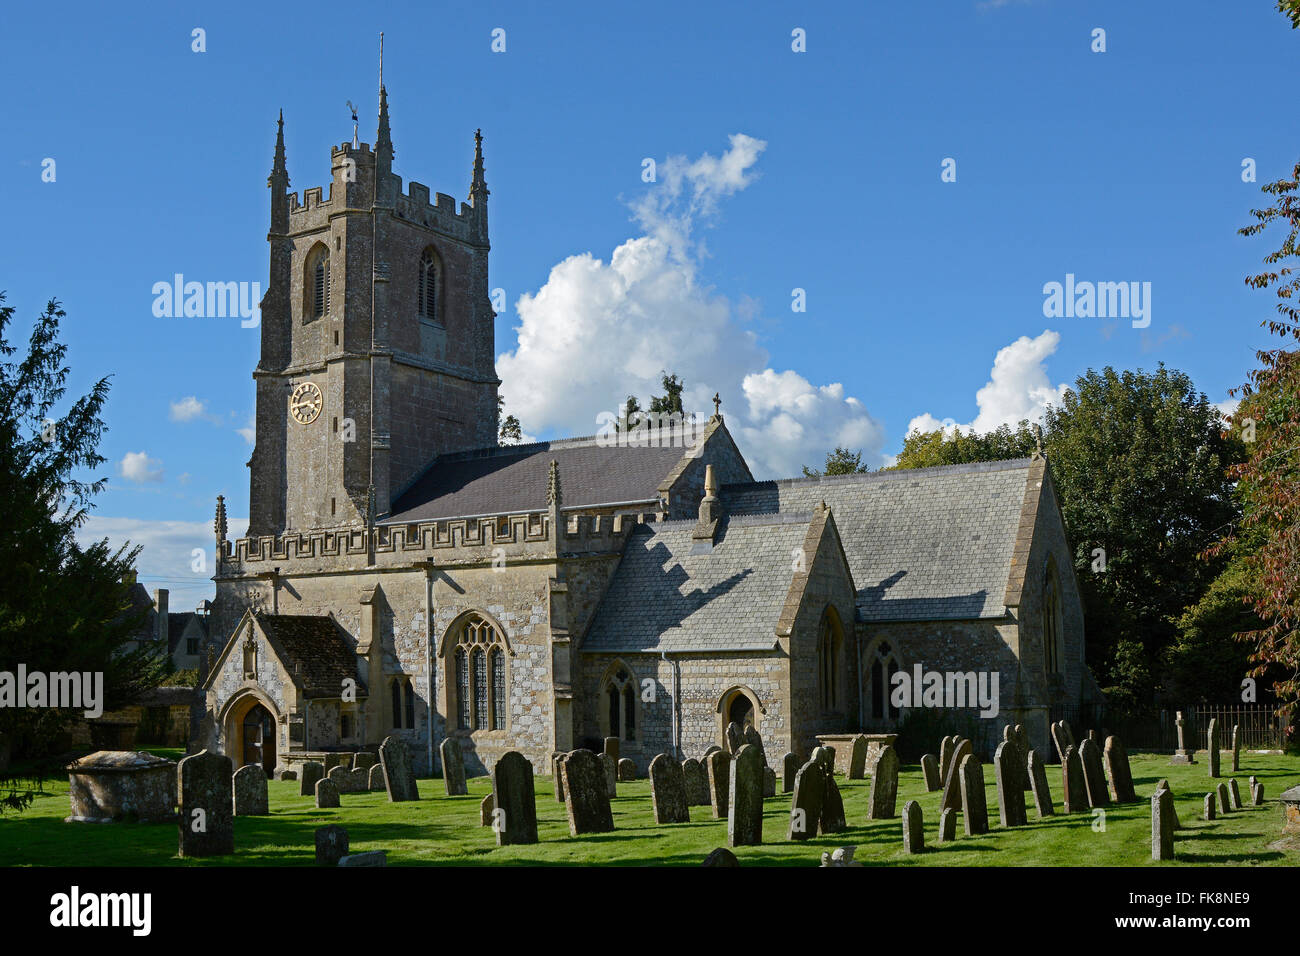 Old stone church at Avebury in Wiltshire, England Stock Photo